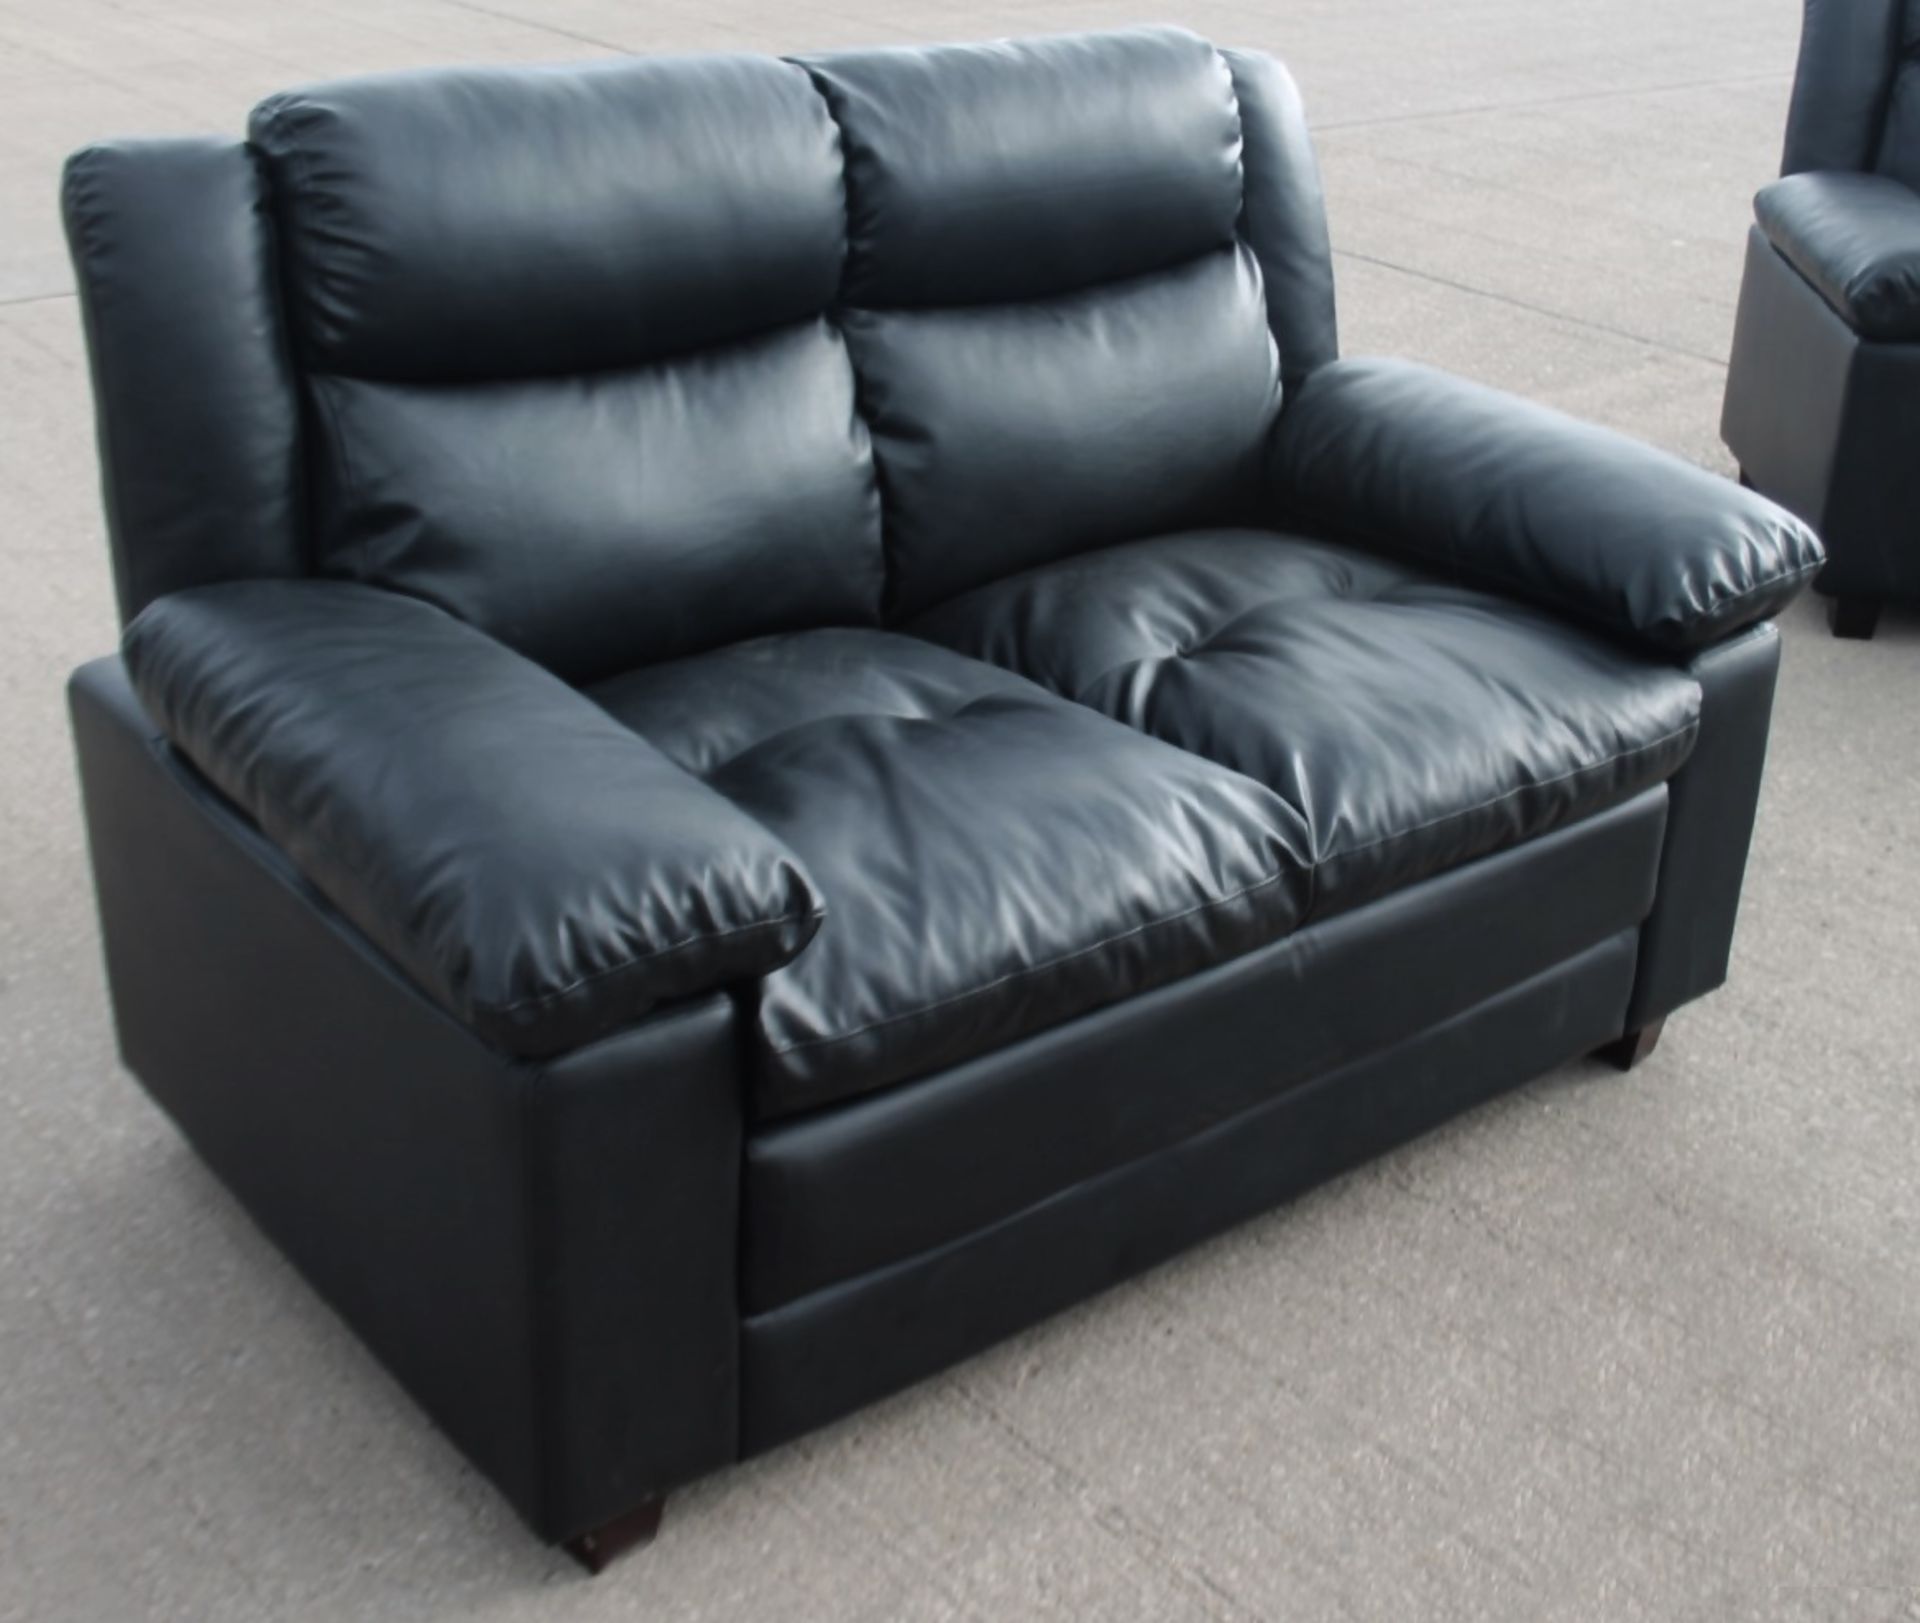 1 x 2-Seater Sofa, Upholstered In A Premium Black Faux Leather - From An Exclusive Property - NO VAT - Image 2 of 4